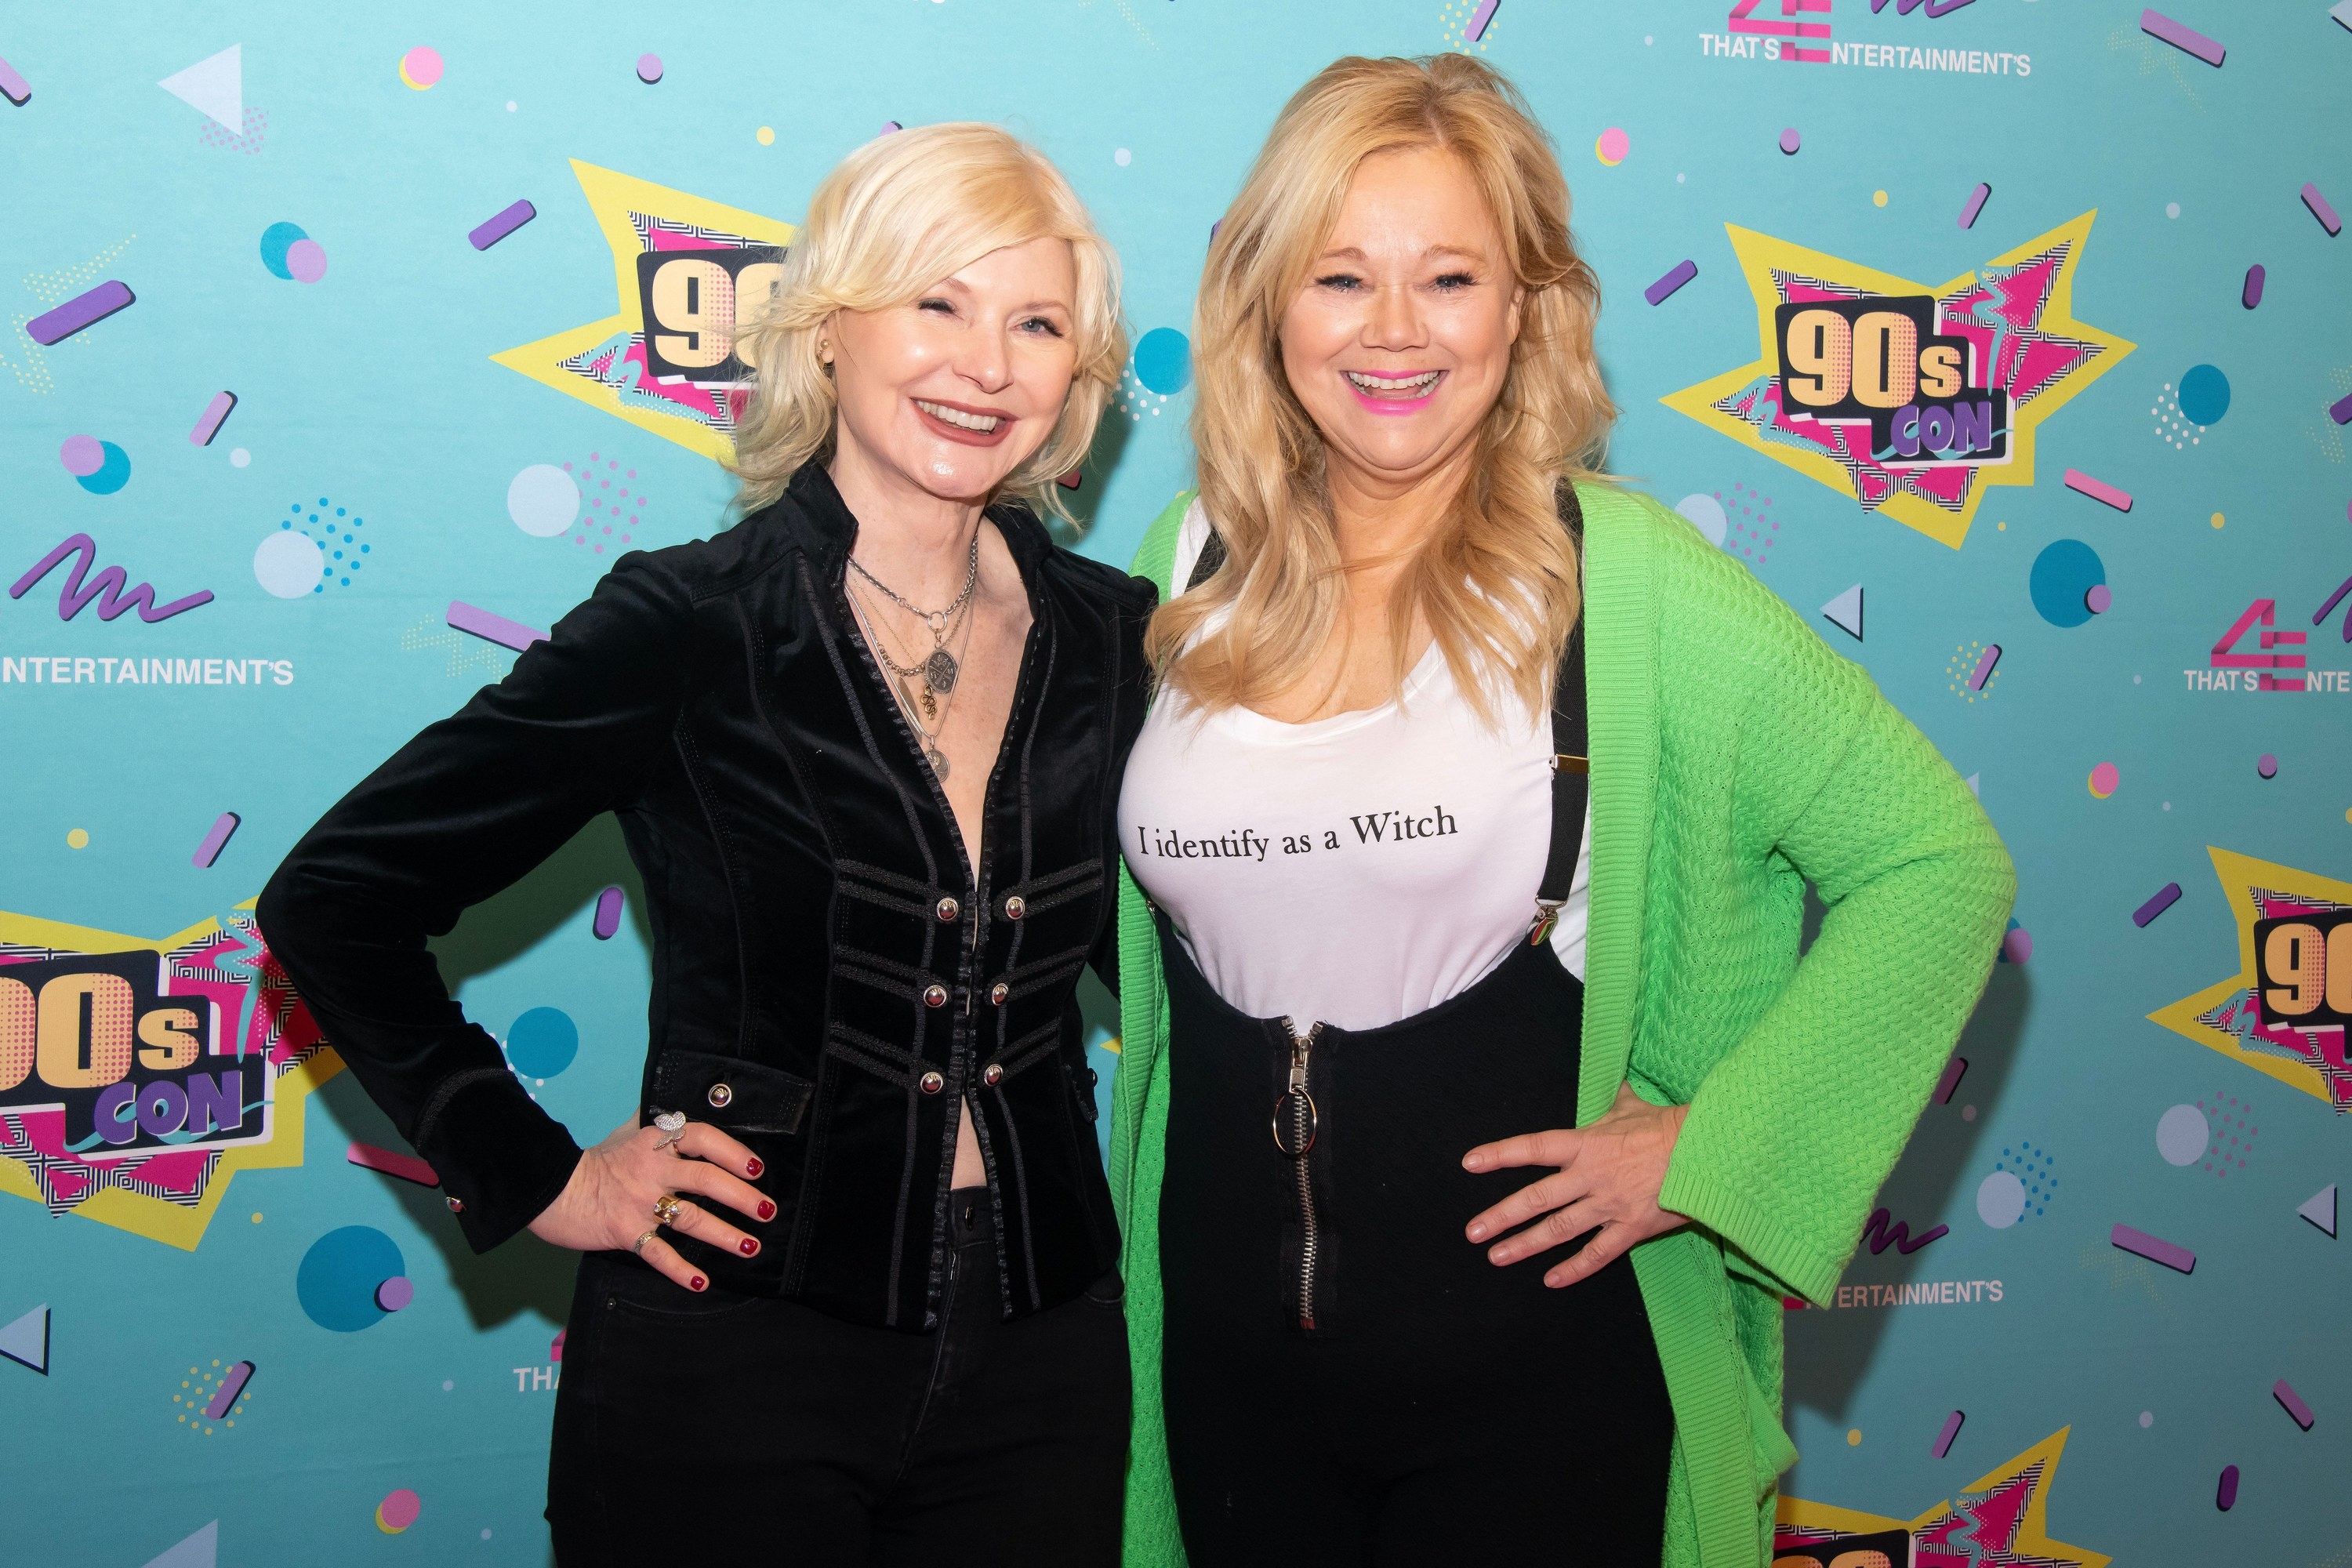 Beth Broderick on the left and Caroline Rhea on the right as the pose on the red carpet. Caroline is wearing a t-shirt that says, &quot;I identify as a Witch&quot;